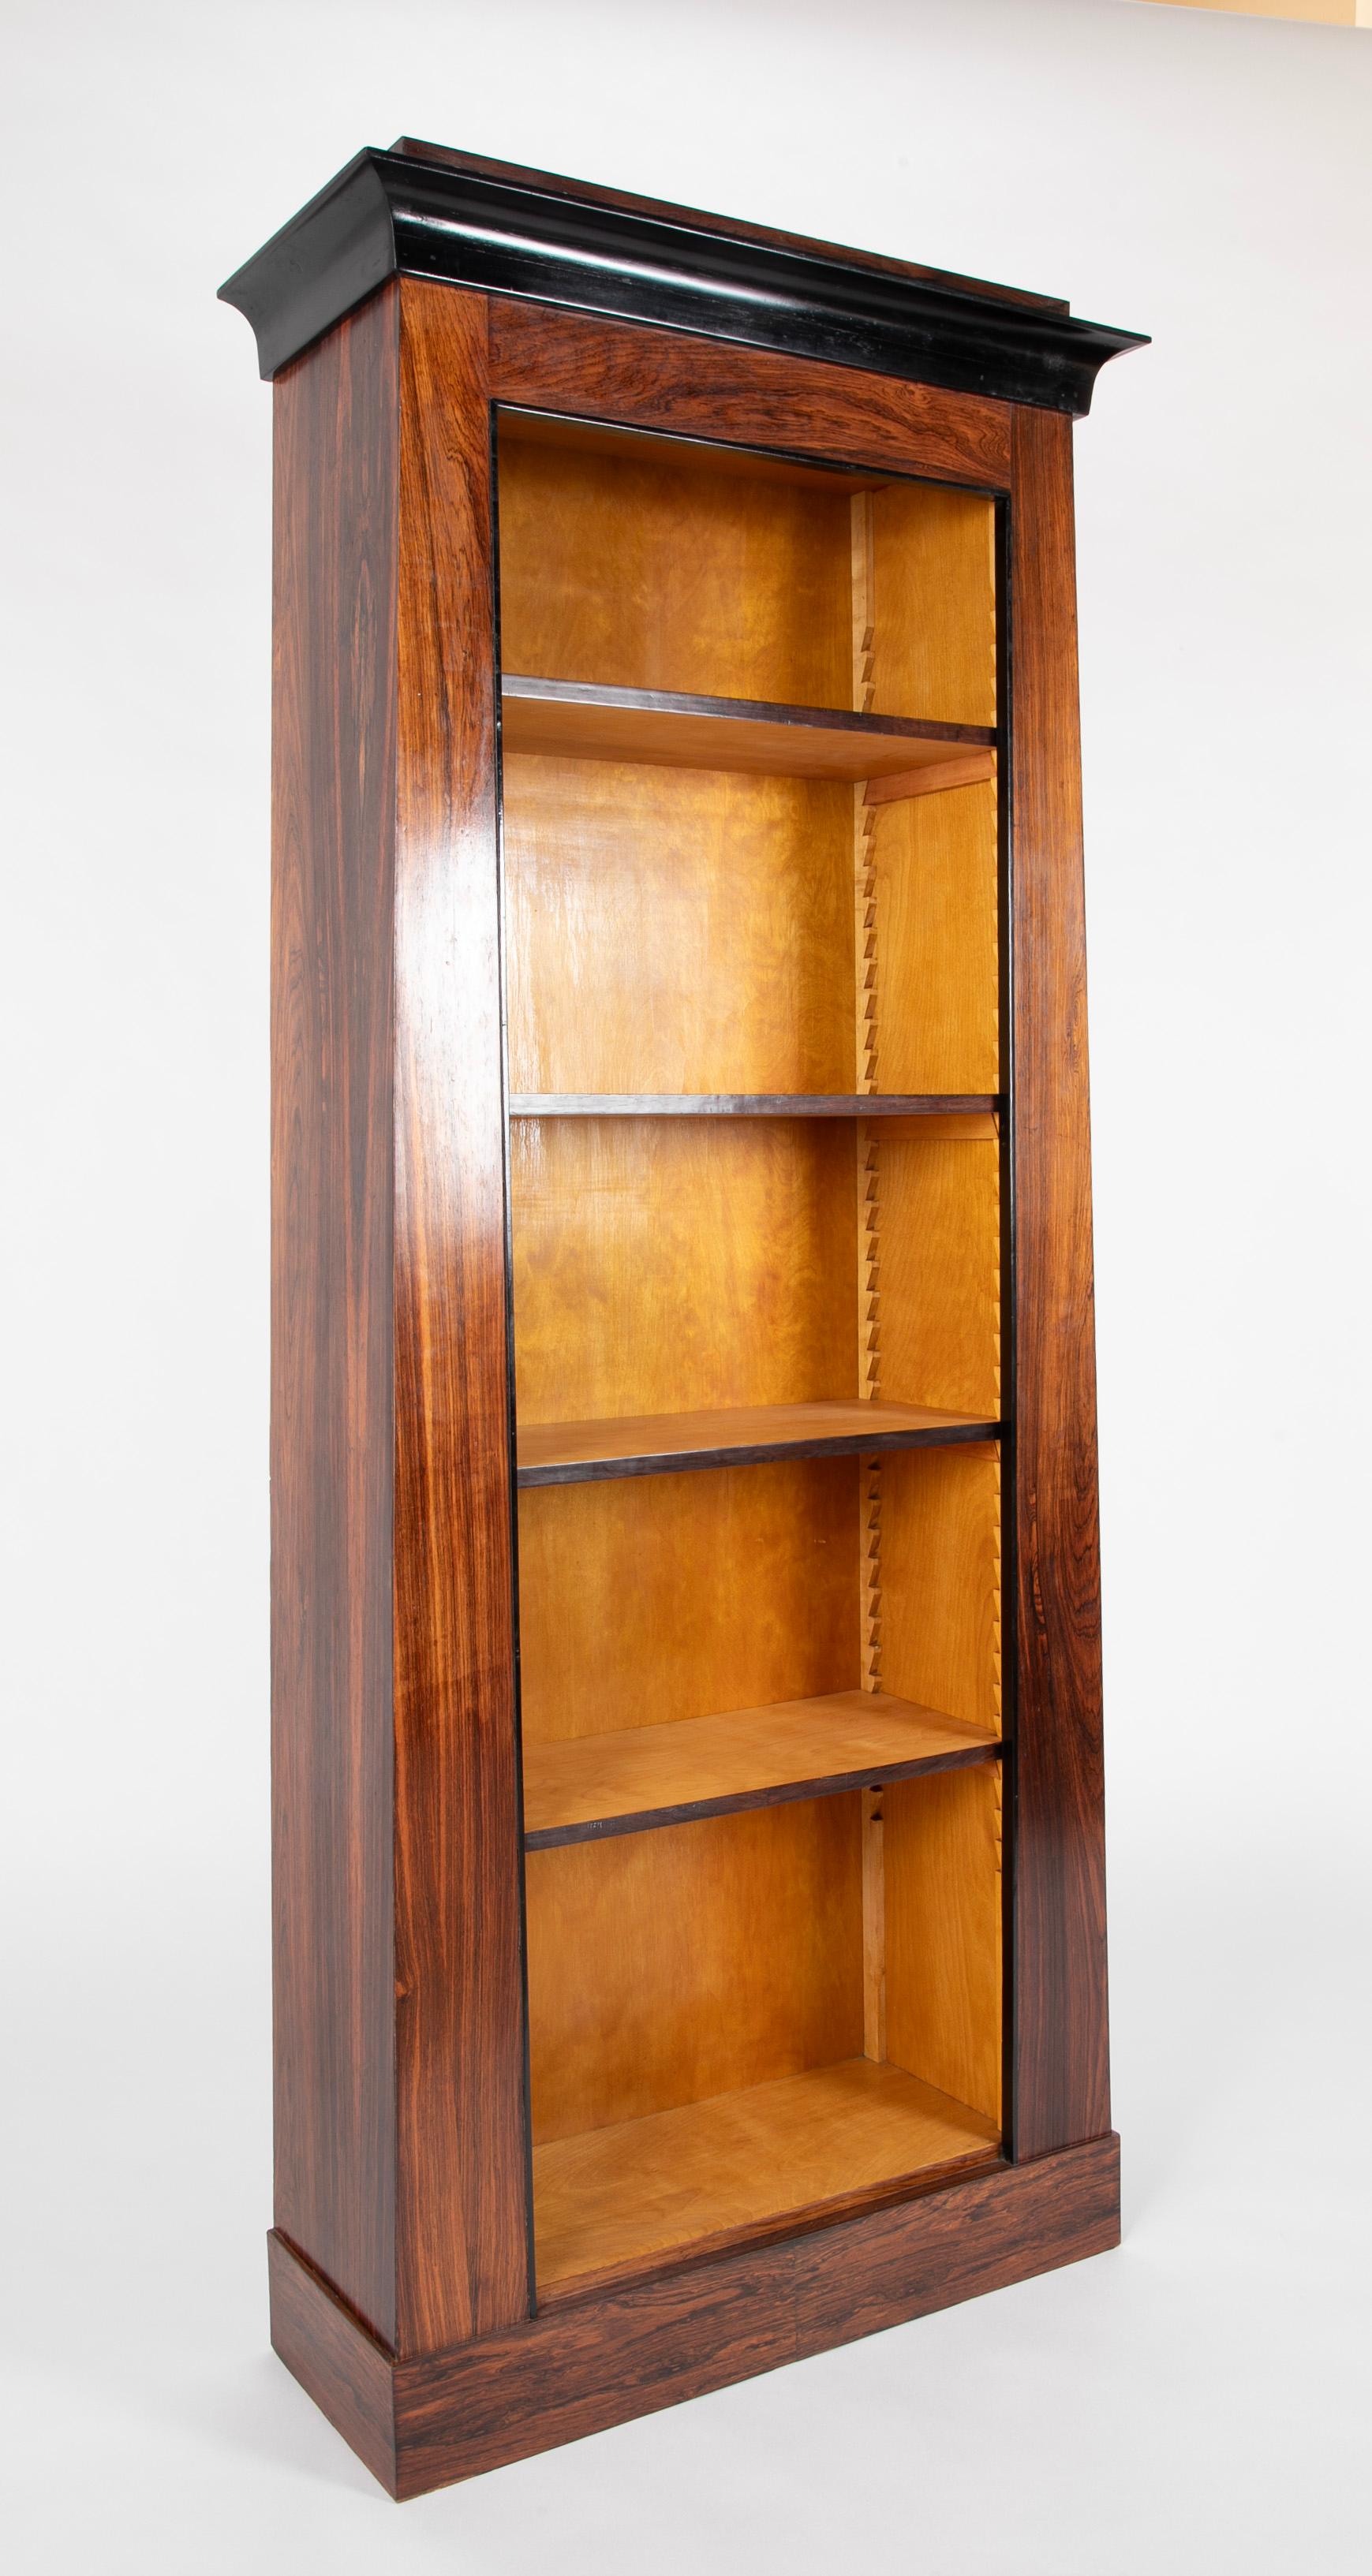 Stunning pair of custom made Regency style rosewood veneered bookshelves with ebonized trim. With five adjustable shelves each. 
These handsome shelves are beautifully made by a master craftsman. 
76.5 inches high by 32 wide by 11.75 deep.